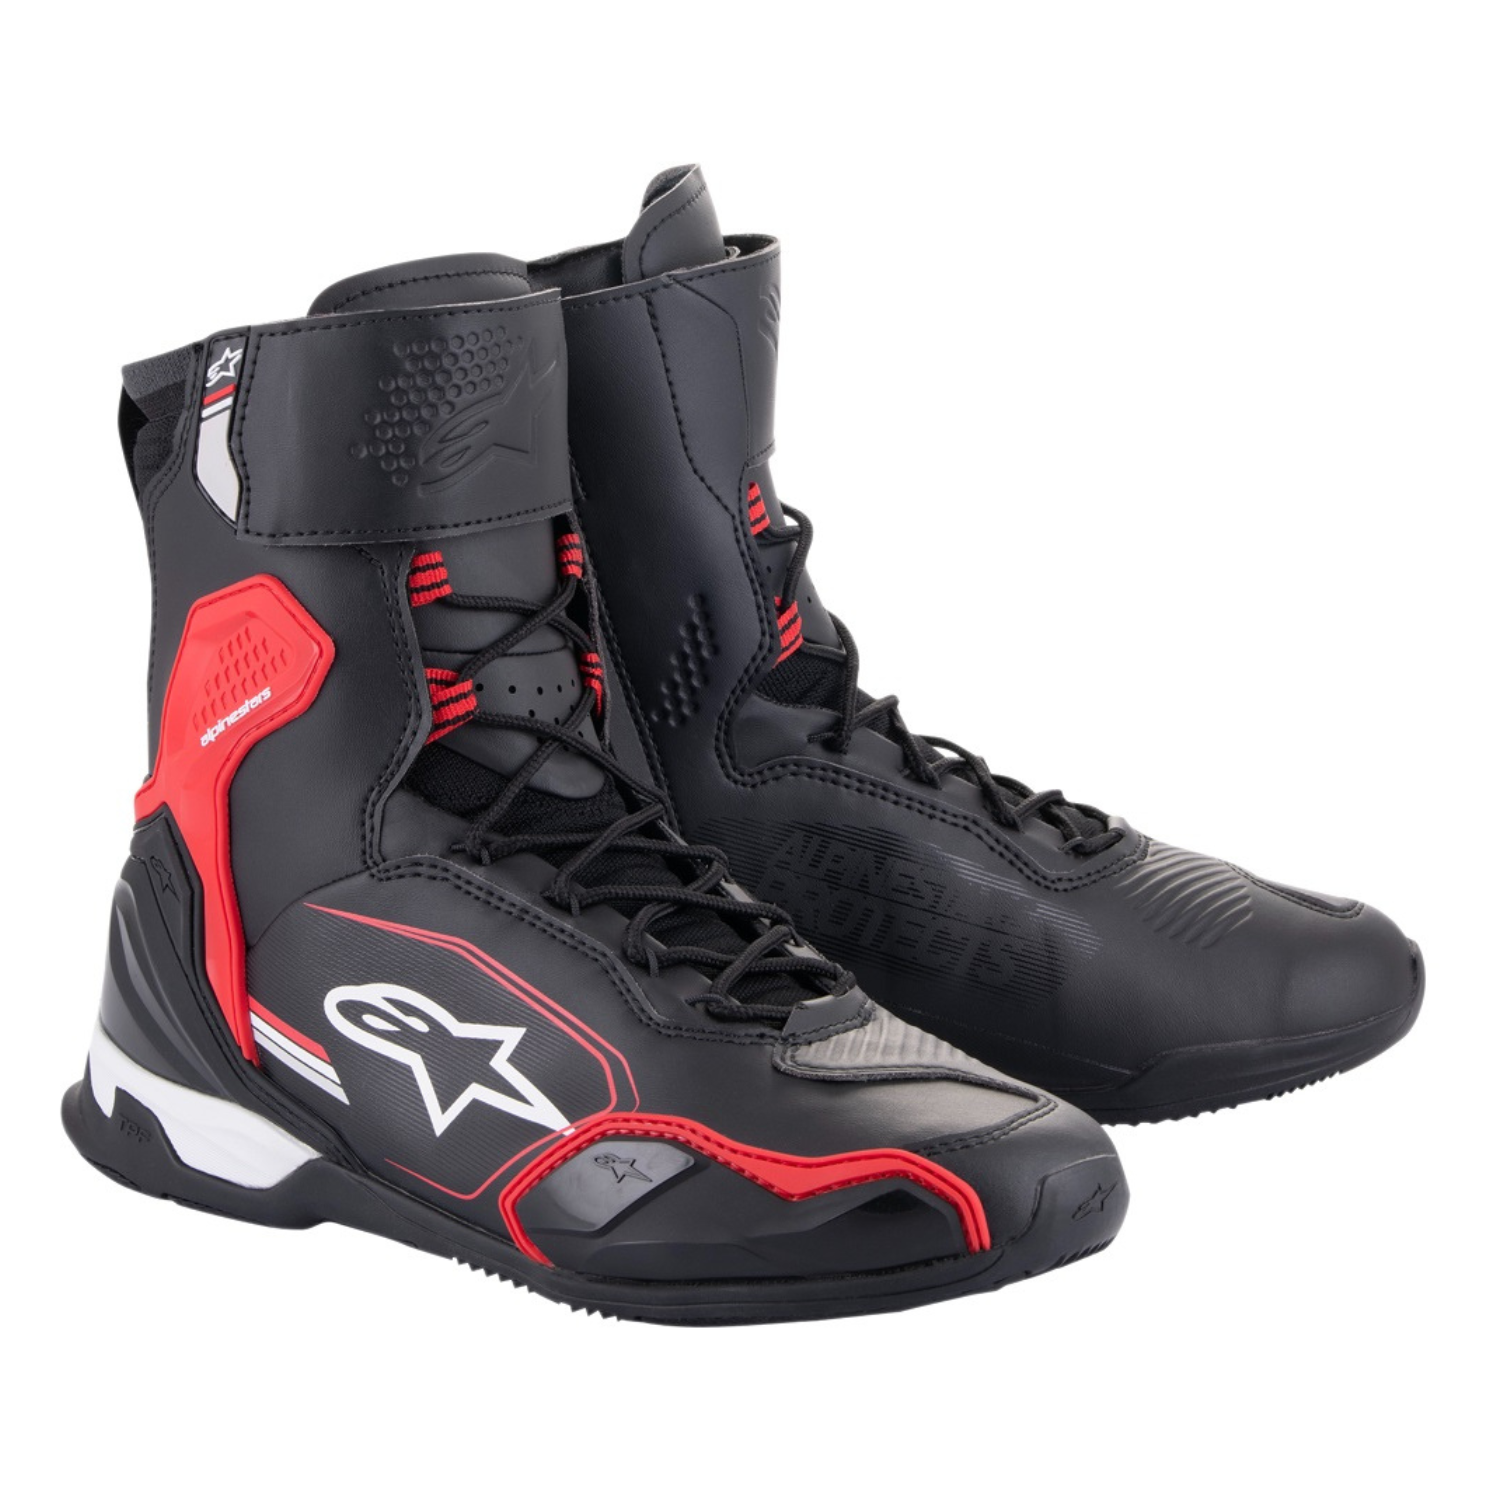 Image of Alpinestars Superfaster Shoes Black Bright Red White Taille US 9